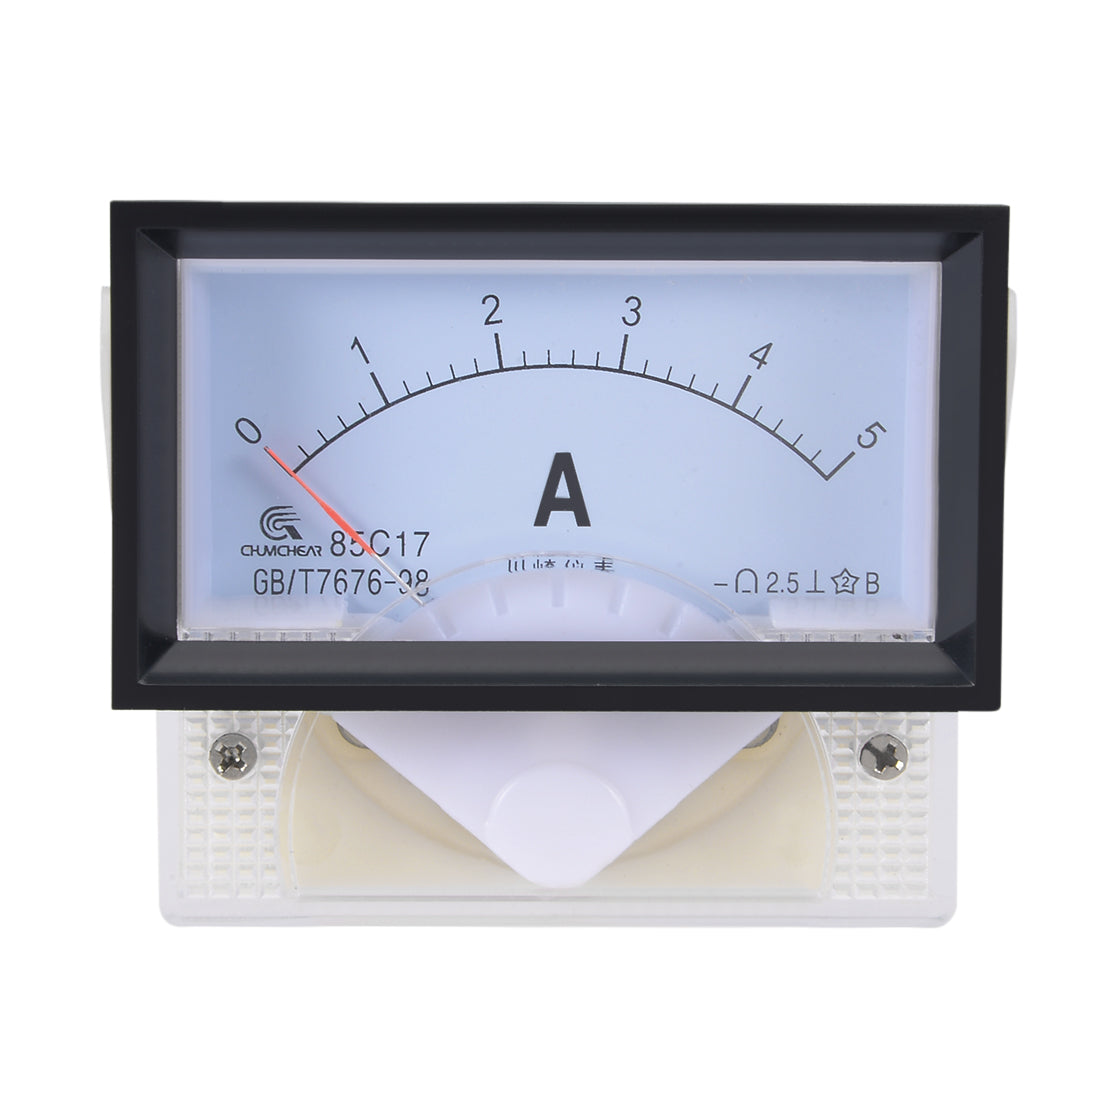 uxcell Uxcell 85C17 Analog Current Panel Meter DC 5A Ammeter for Circuit Testing Ampere Tester Gauge 1 PCS